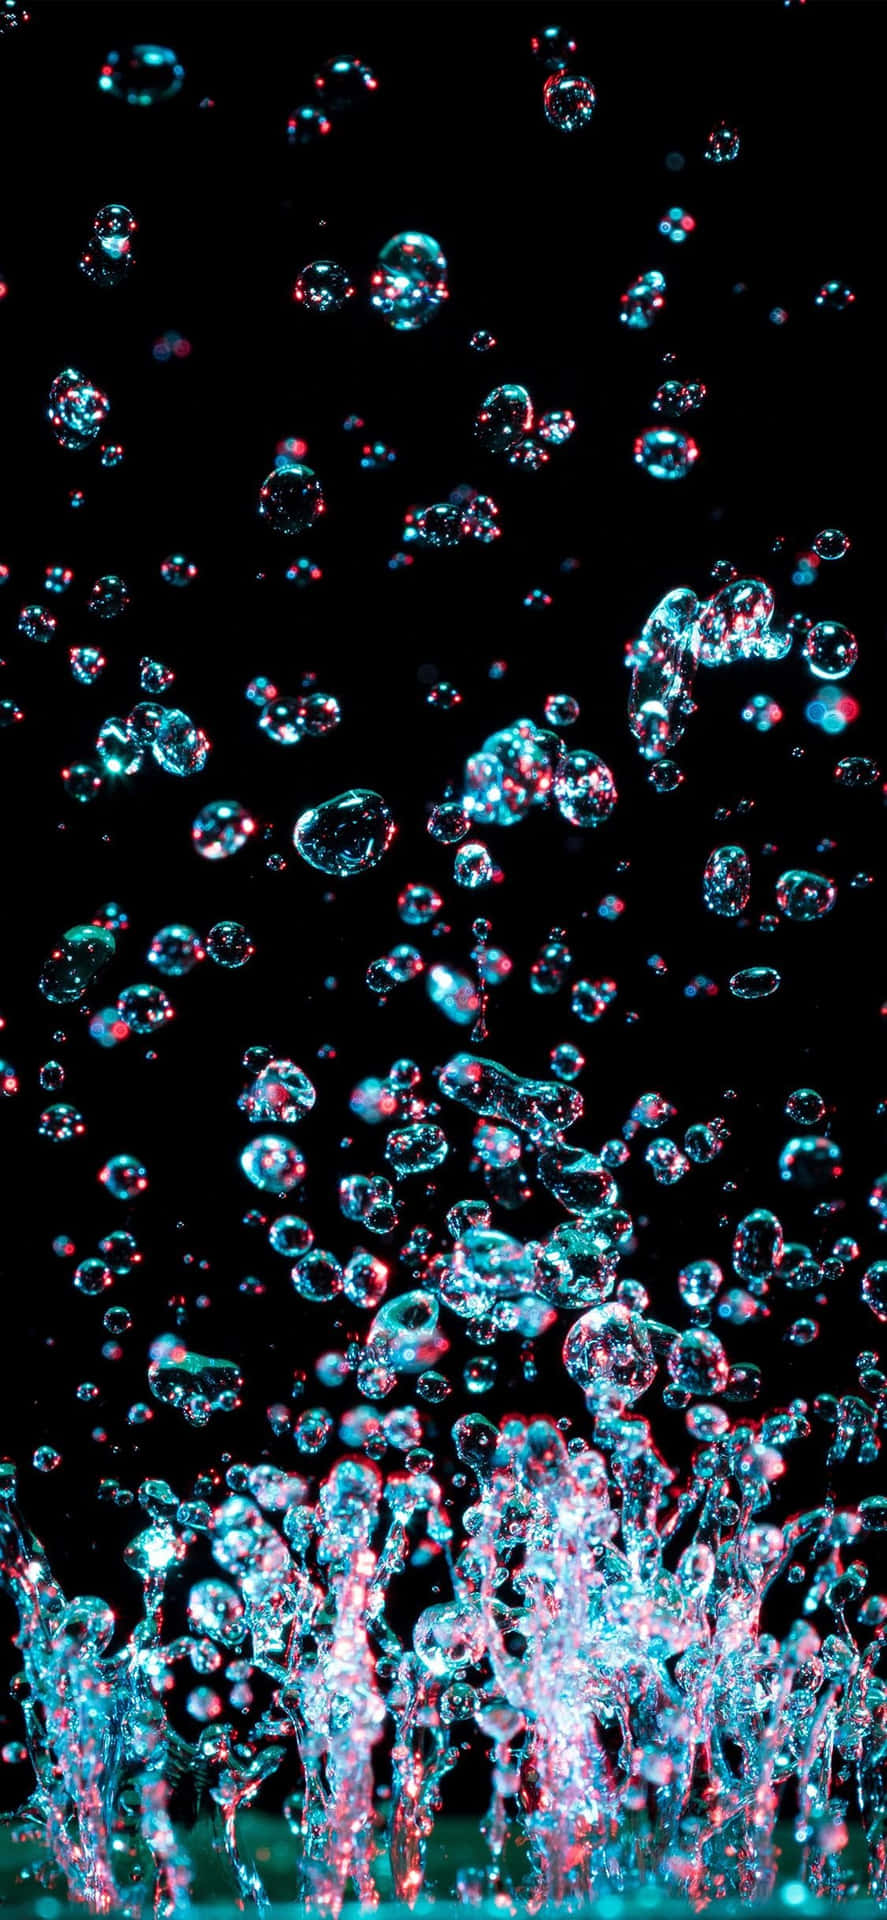 Water Bubbles In A Black Background